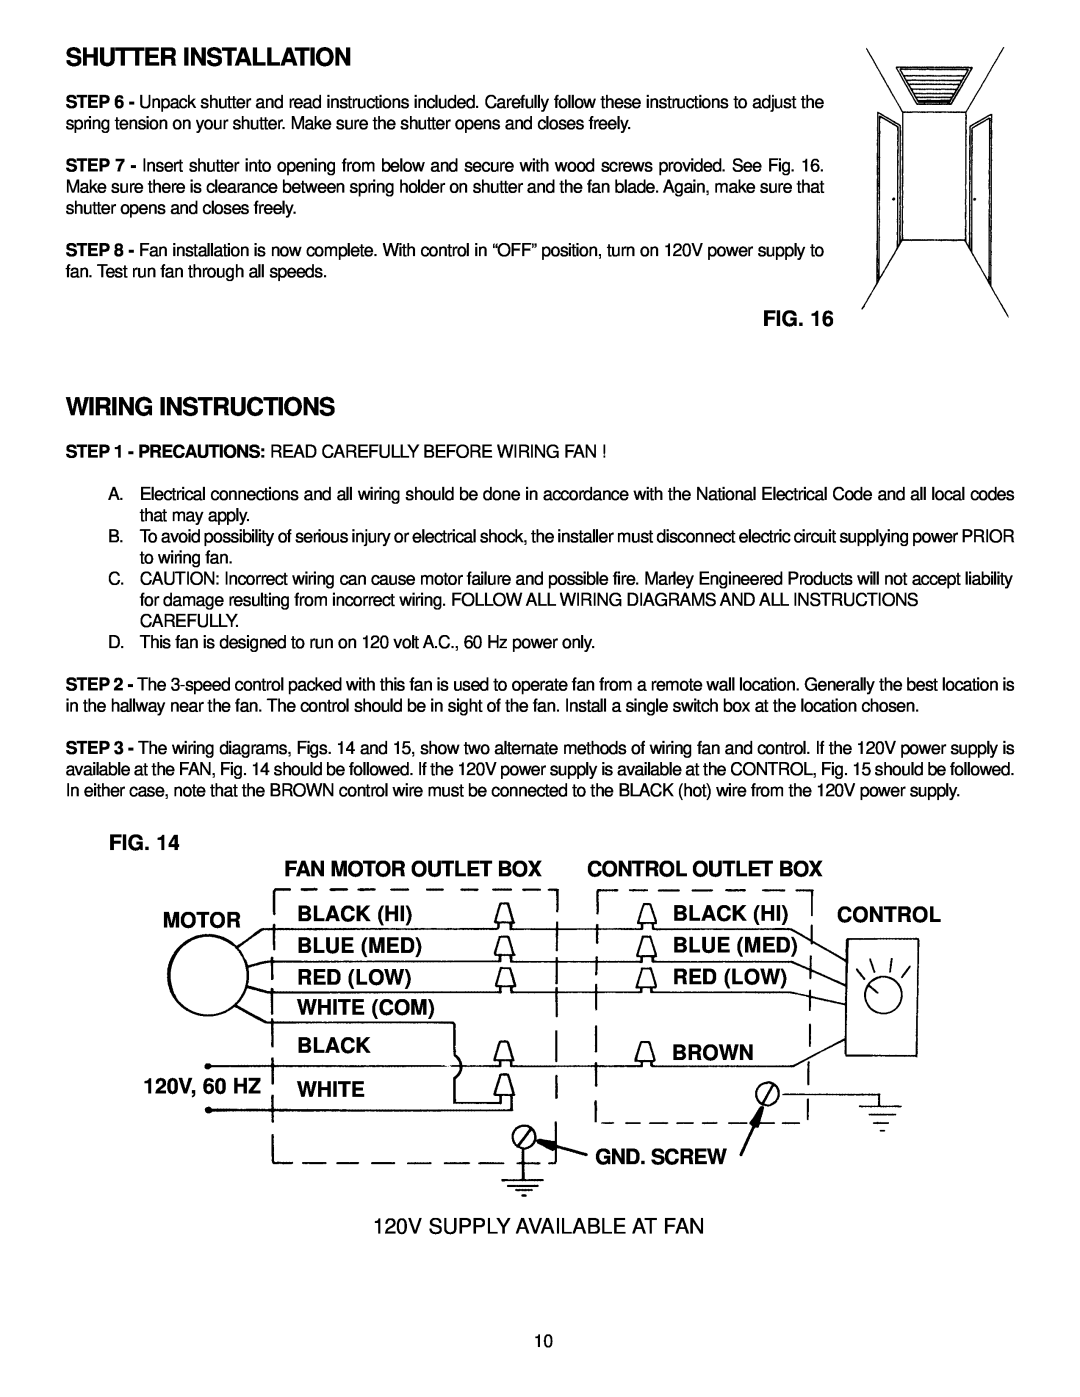 Marley Engineered Products 3038R, 2438, 3638R manual Wiring Instructions, Shutter Installation 